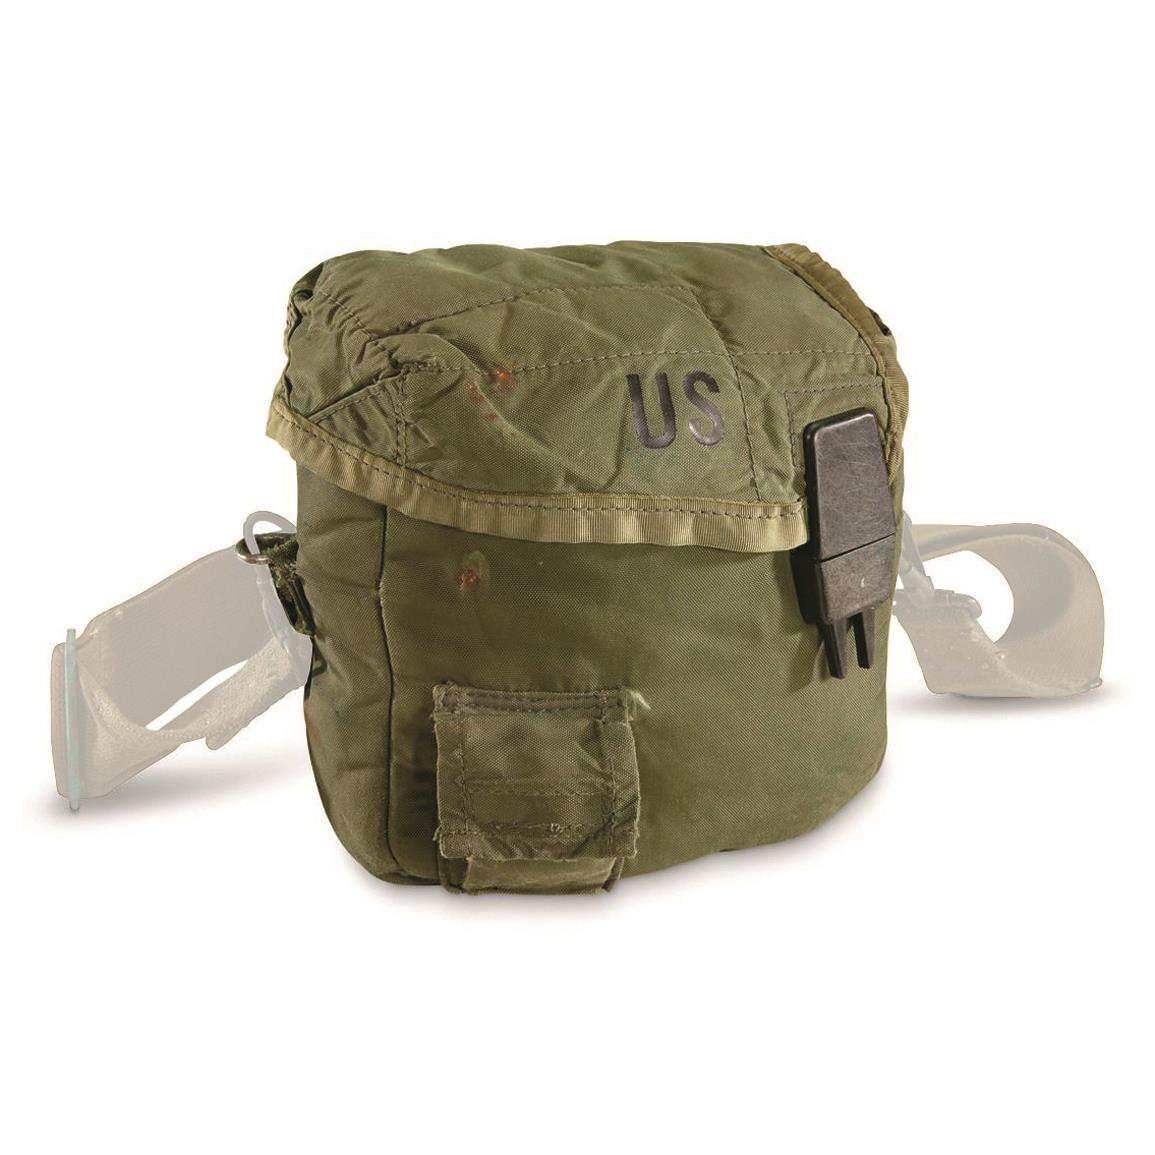 U.S. Military Surplus Canteen Cover, No Shoulder Strap, Used, Olive Drab